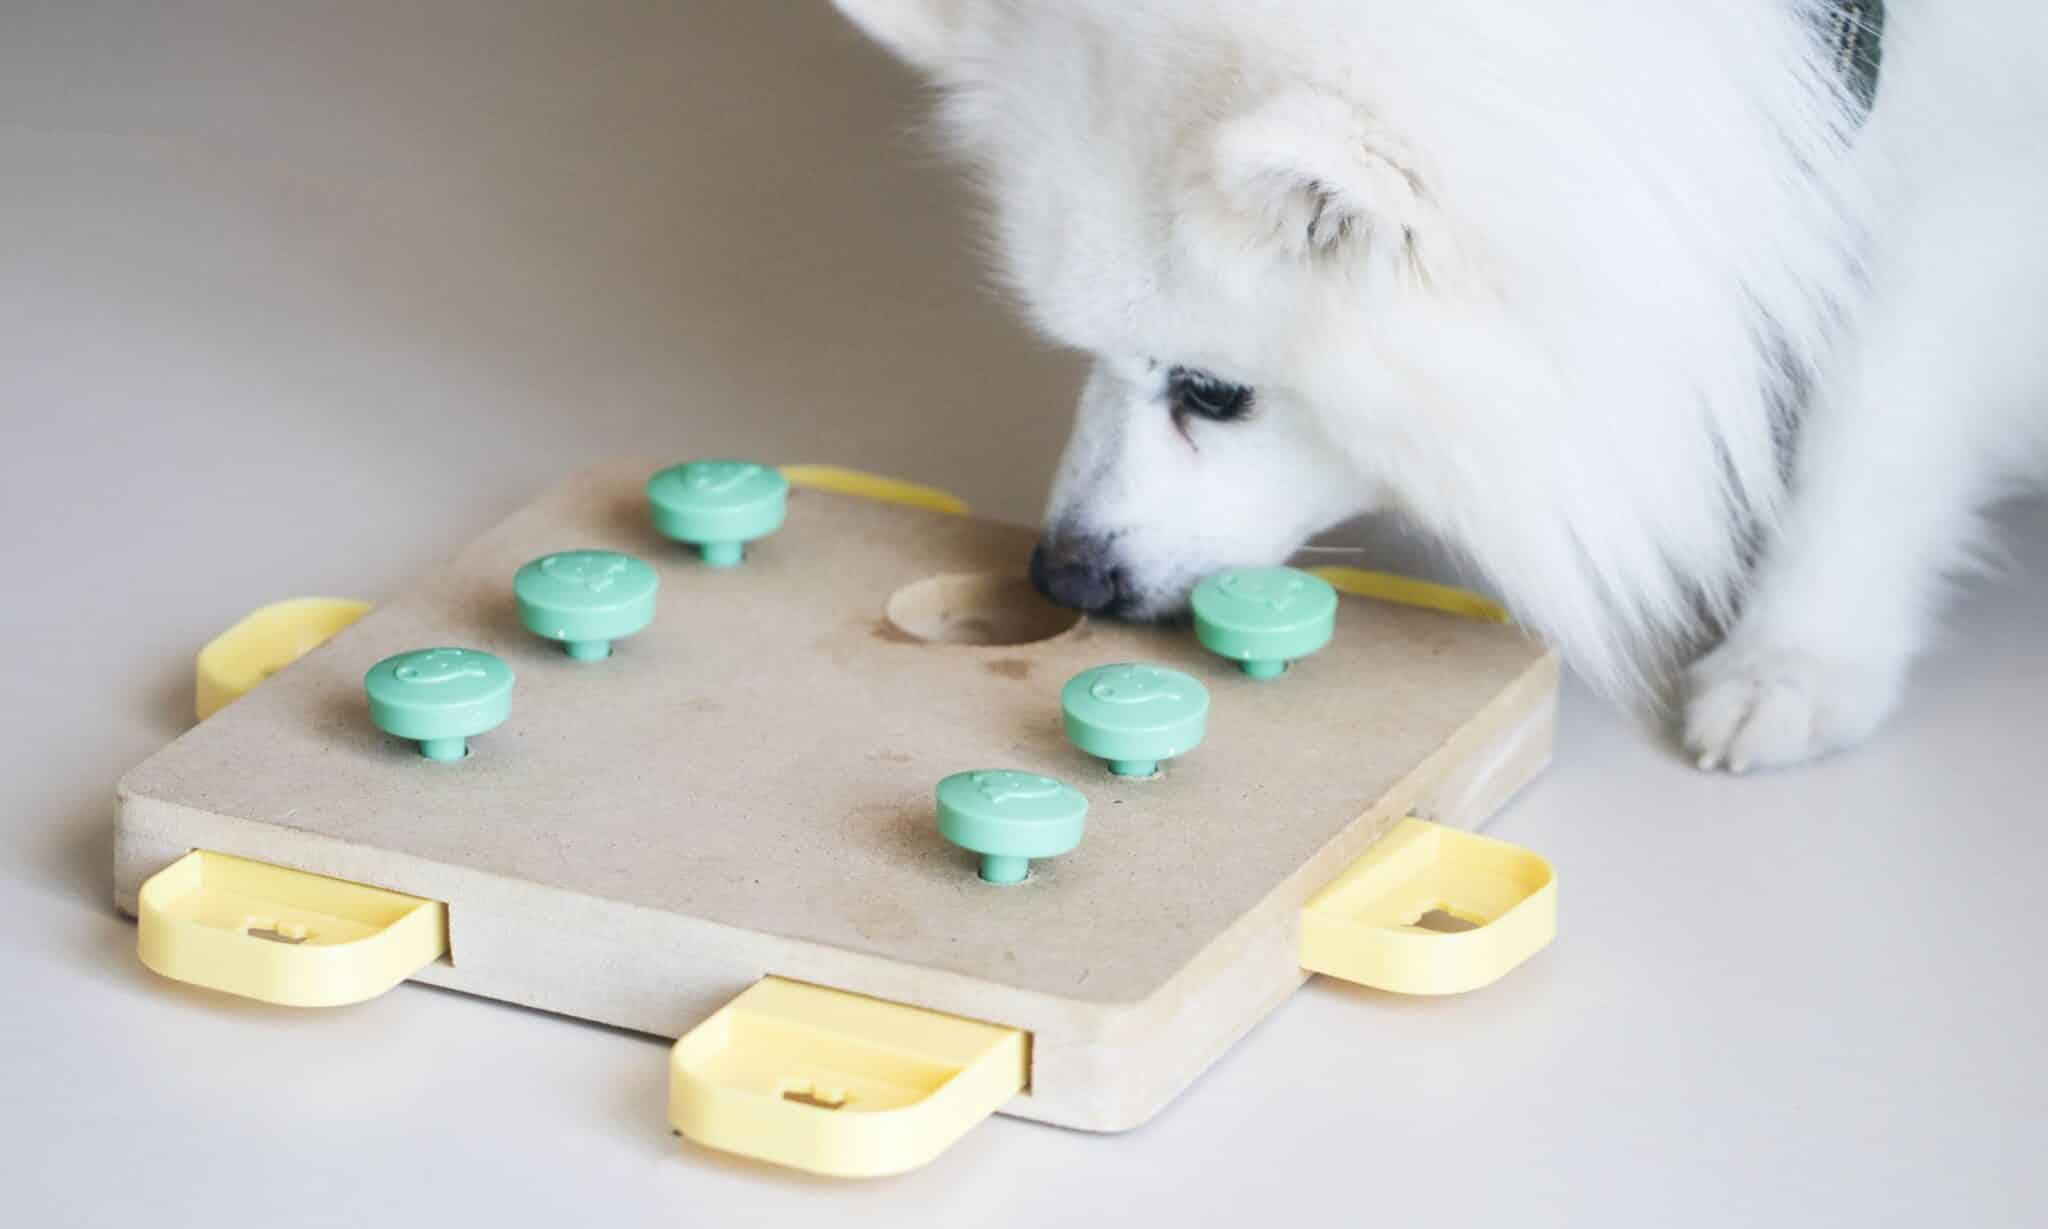 Three Simple Nose Work Games to Play With Your Dog - Puppy Leaks